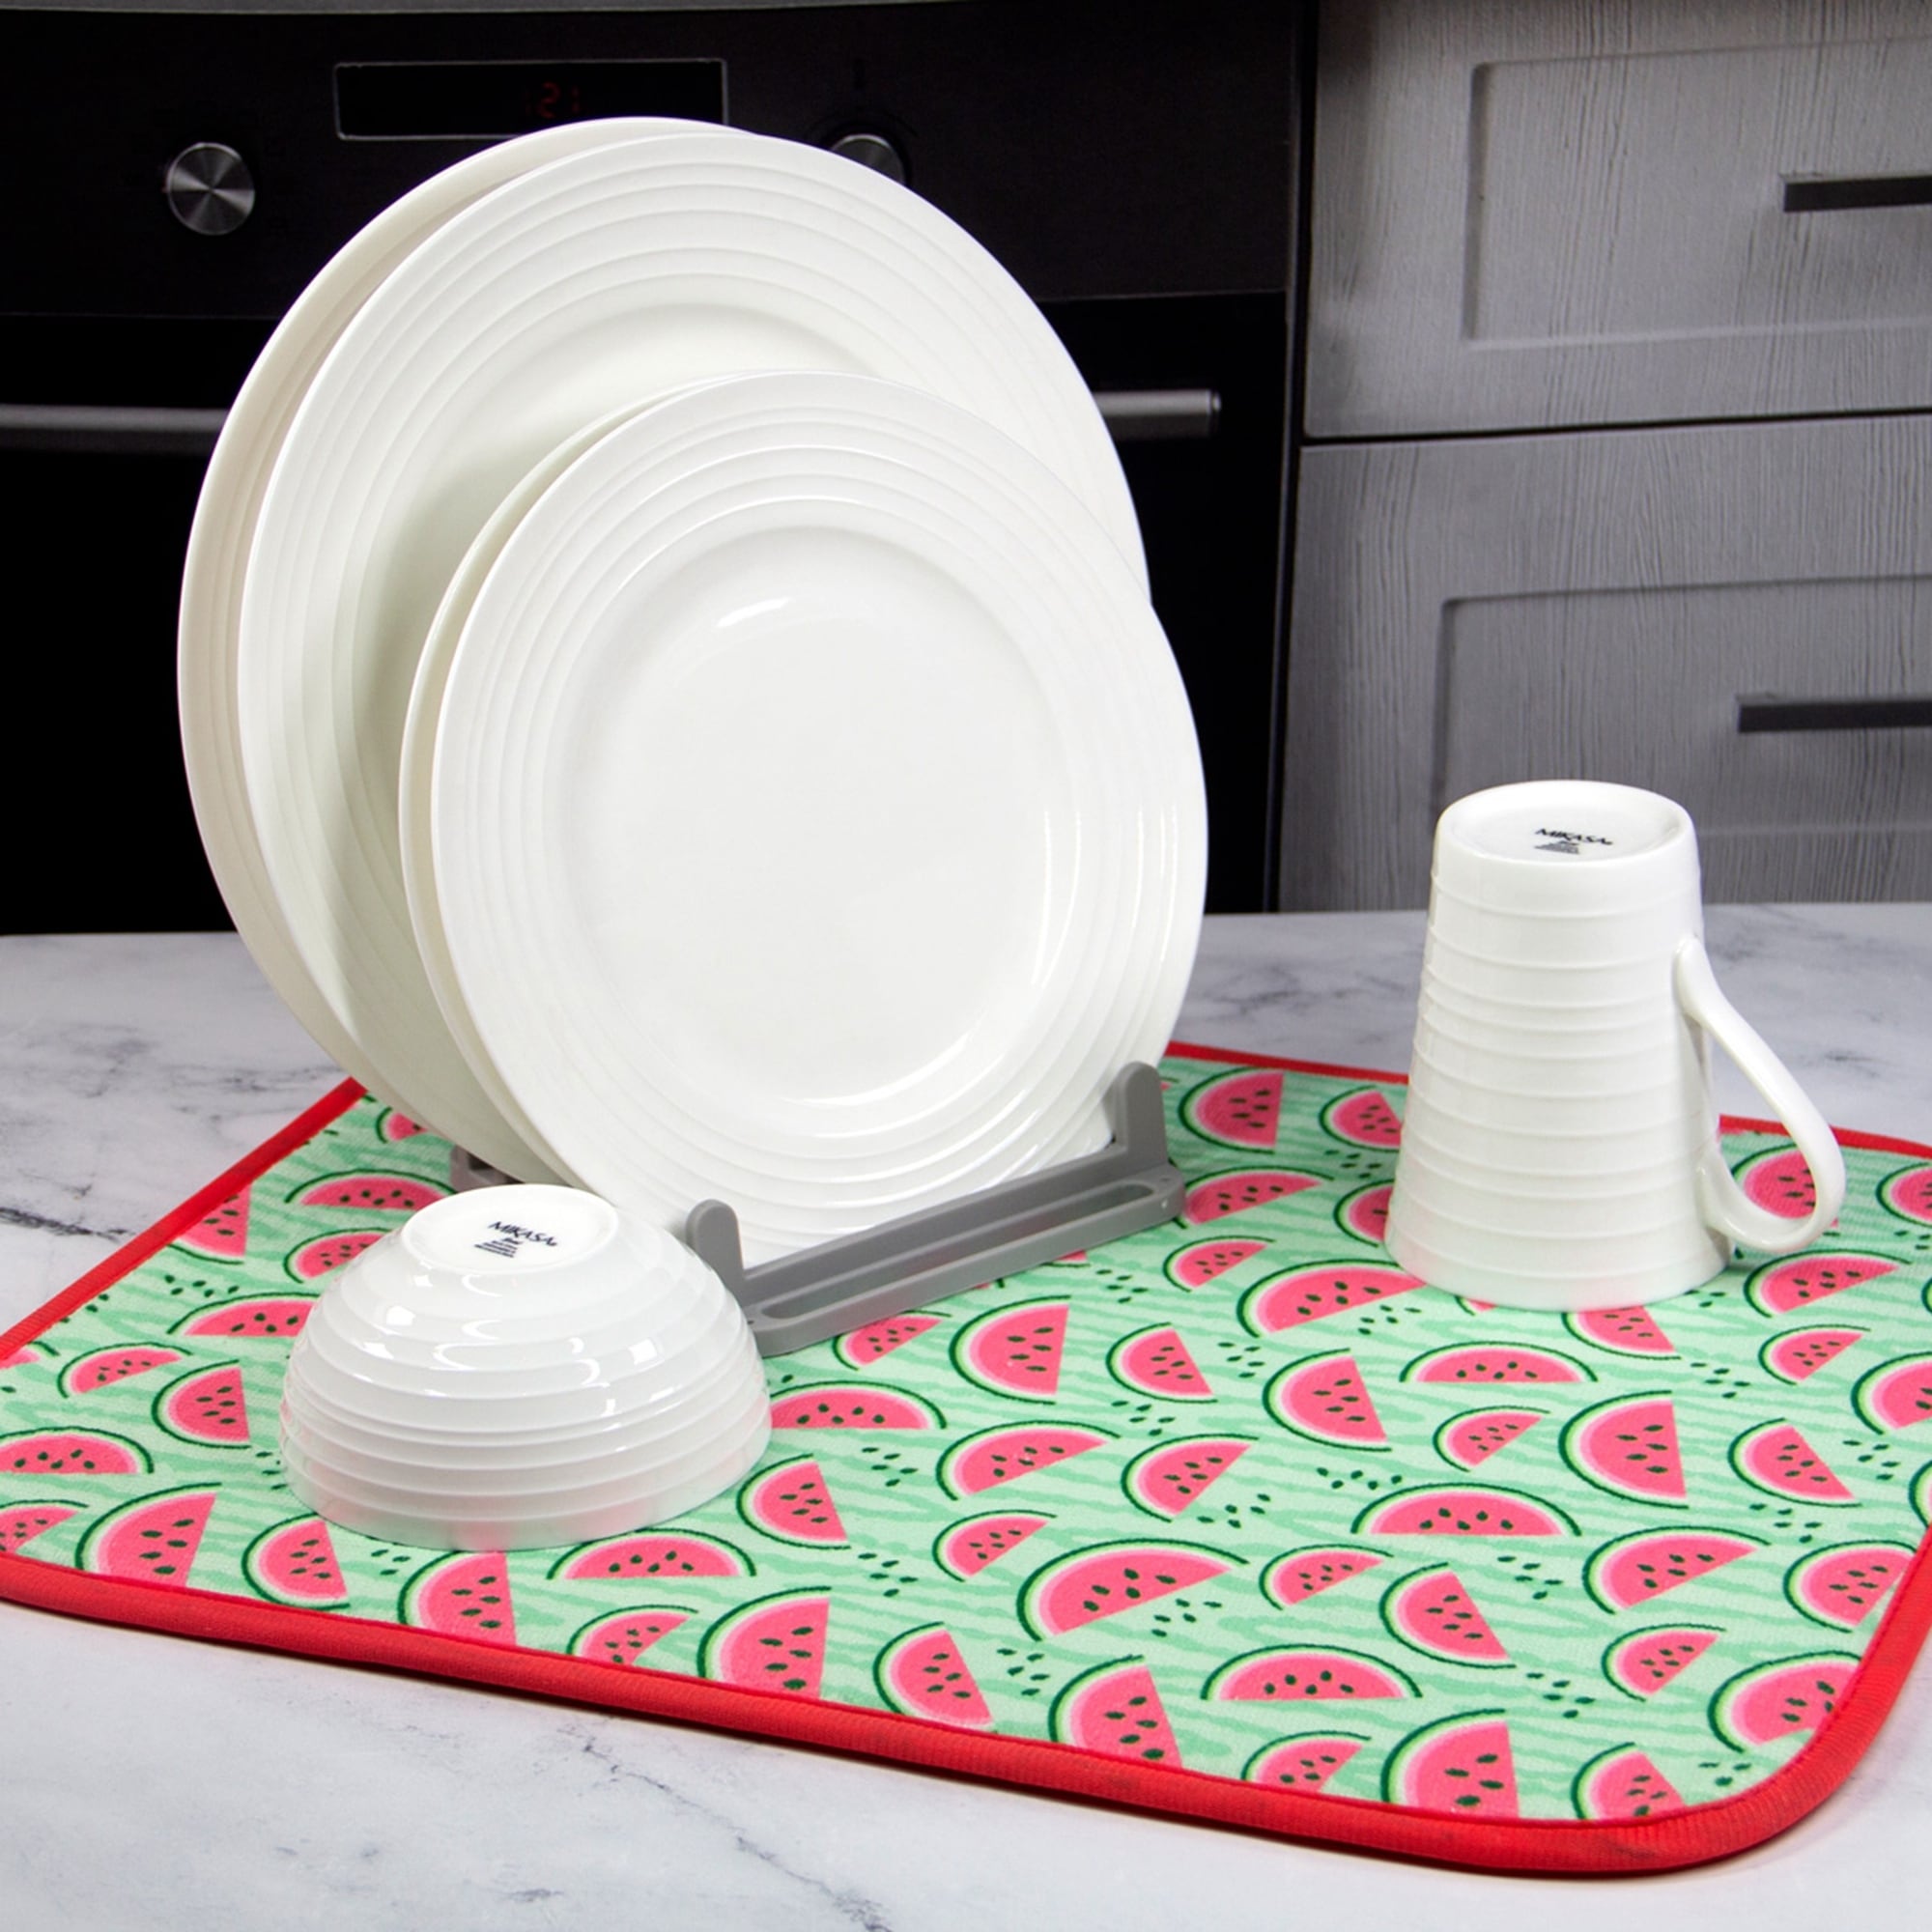 https://ak1.ostkcdn.com/images/products/is/images/direct/7c1757145b7035be7cb34487bf8f96c02700cfce/Reversible-Dish-Drying-Mat-2-Pk%2C-Watermelon.jpg